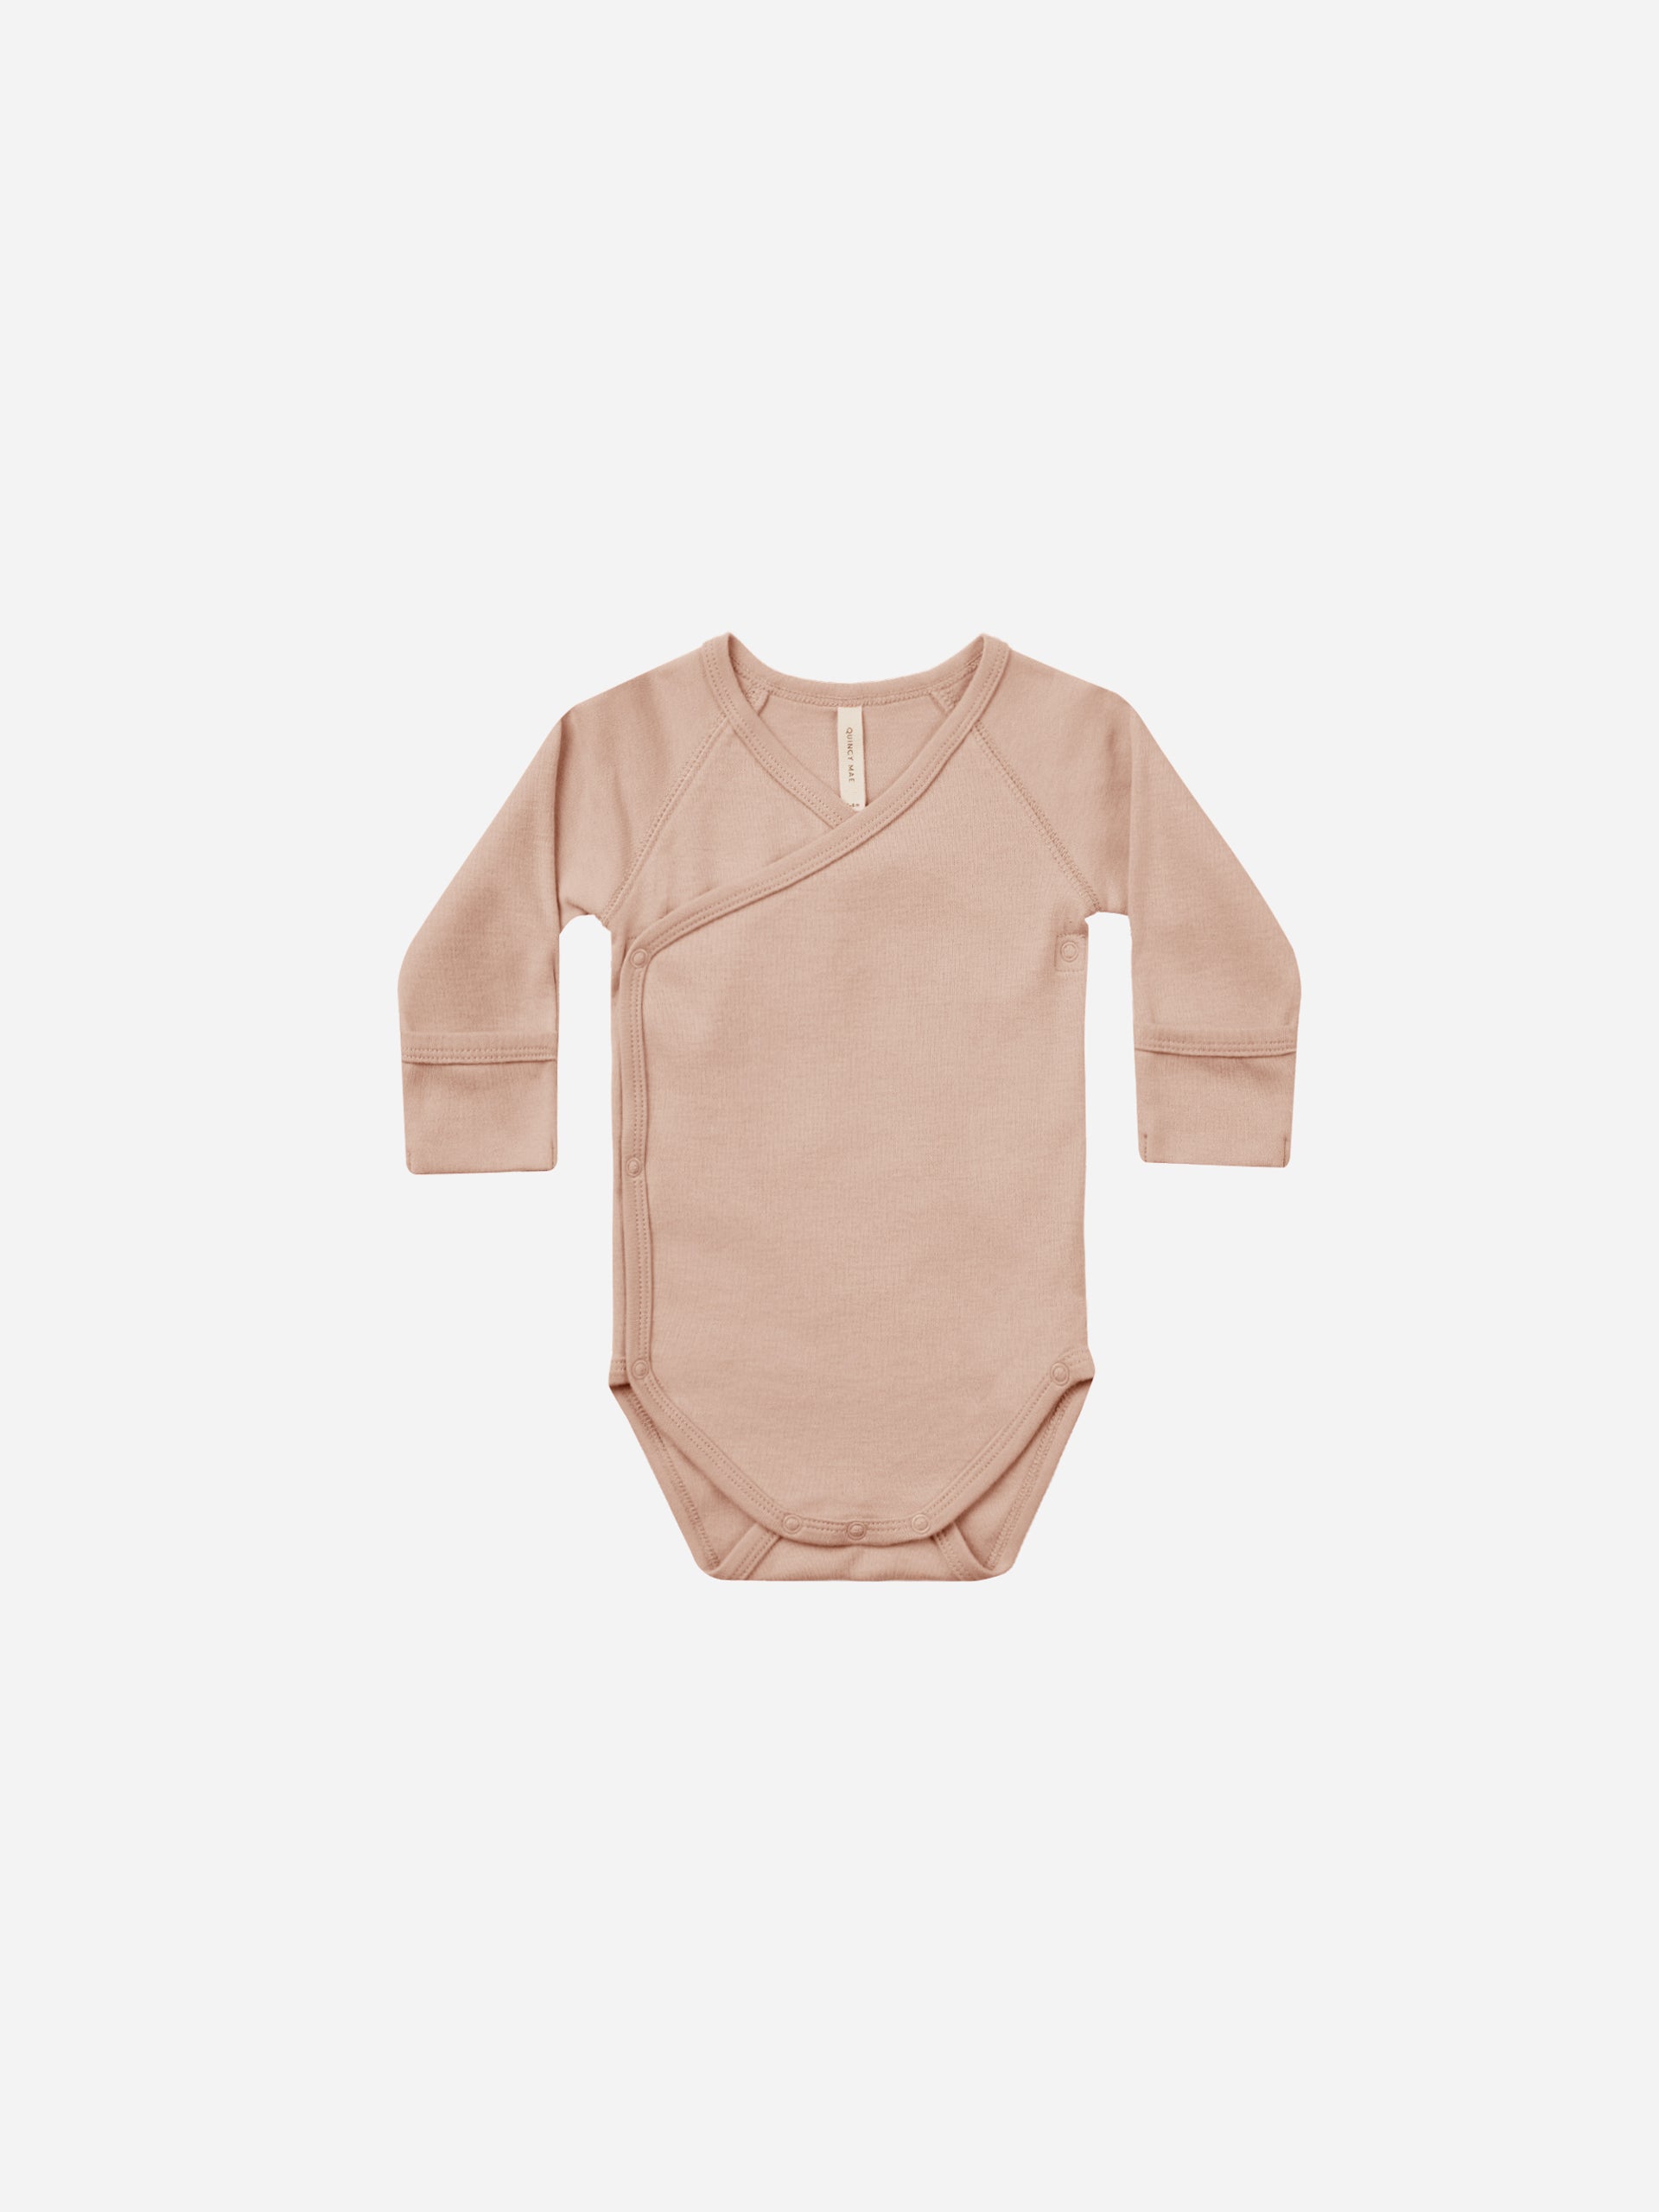 Side Snap Bodysuit || Blush - Rylee + Cru | Kids Clothes | Trendy Baby Clothes | Modern Infant Outfits |